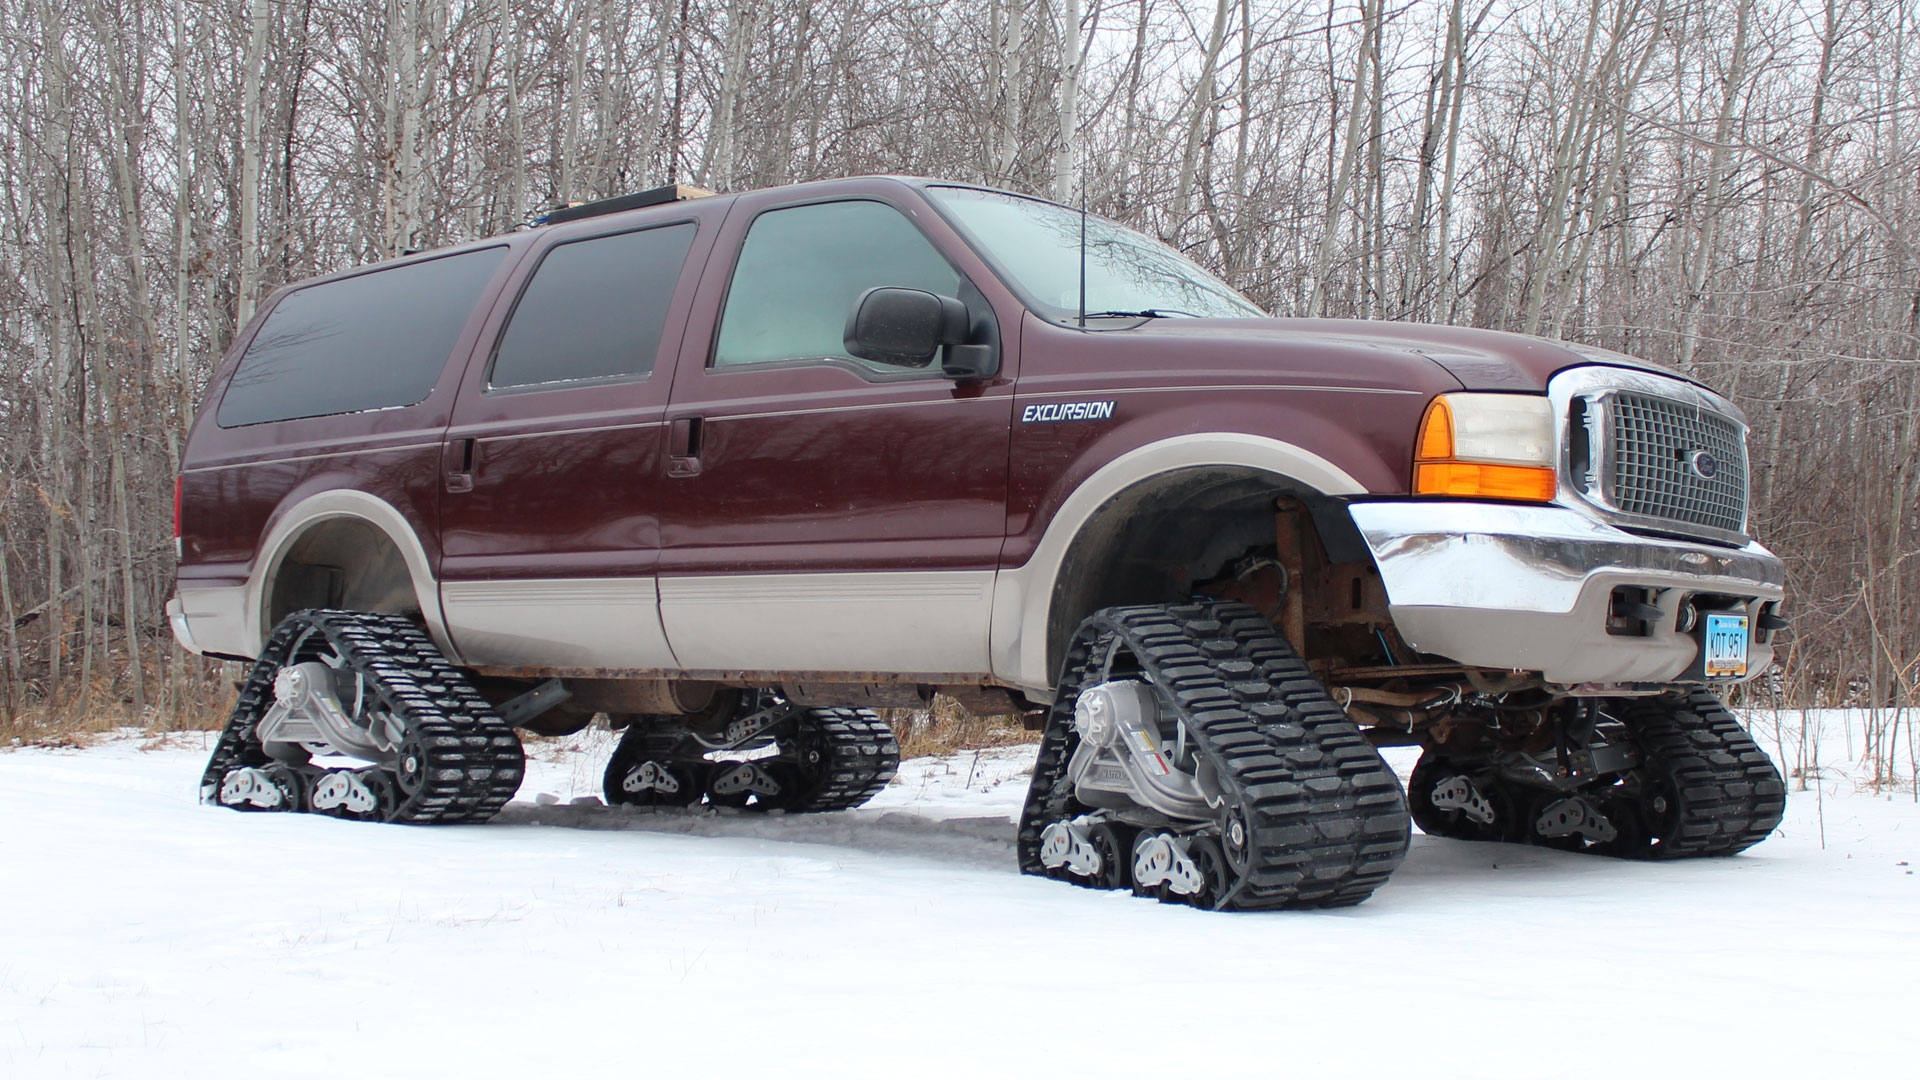 105 Tracks on a Ford Excursion